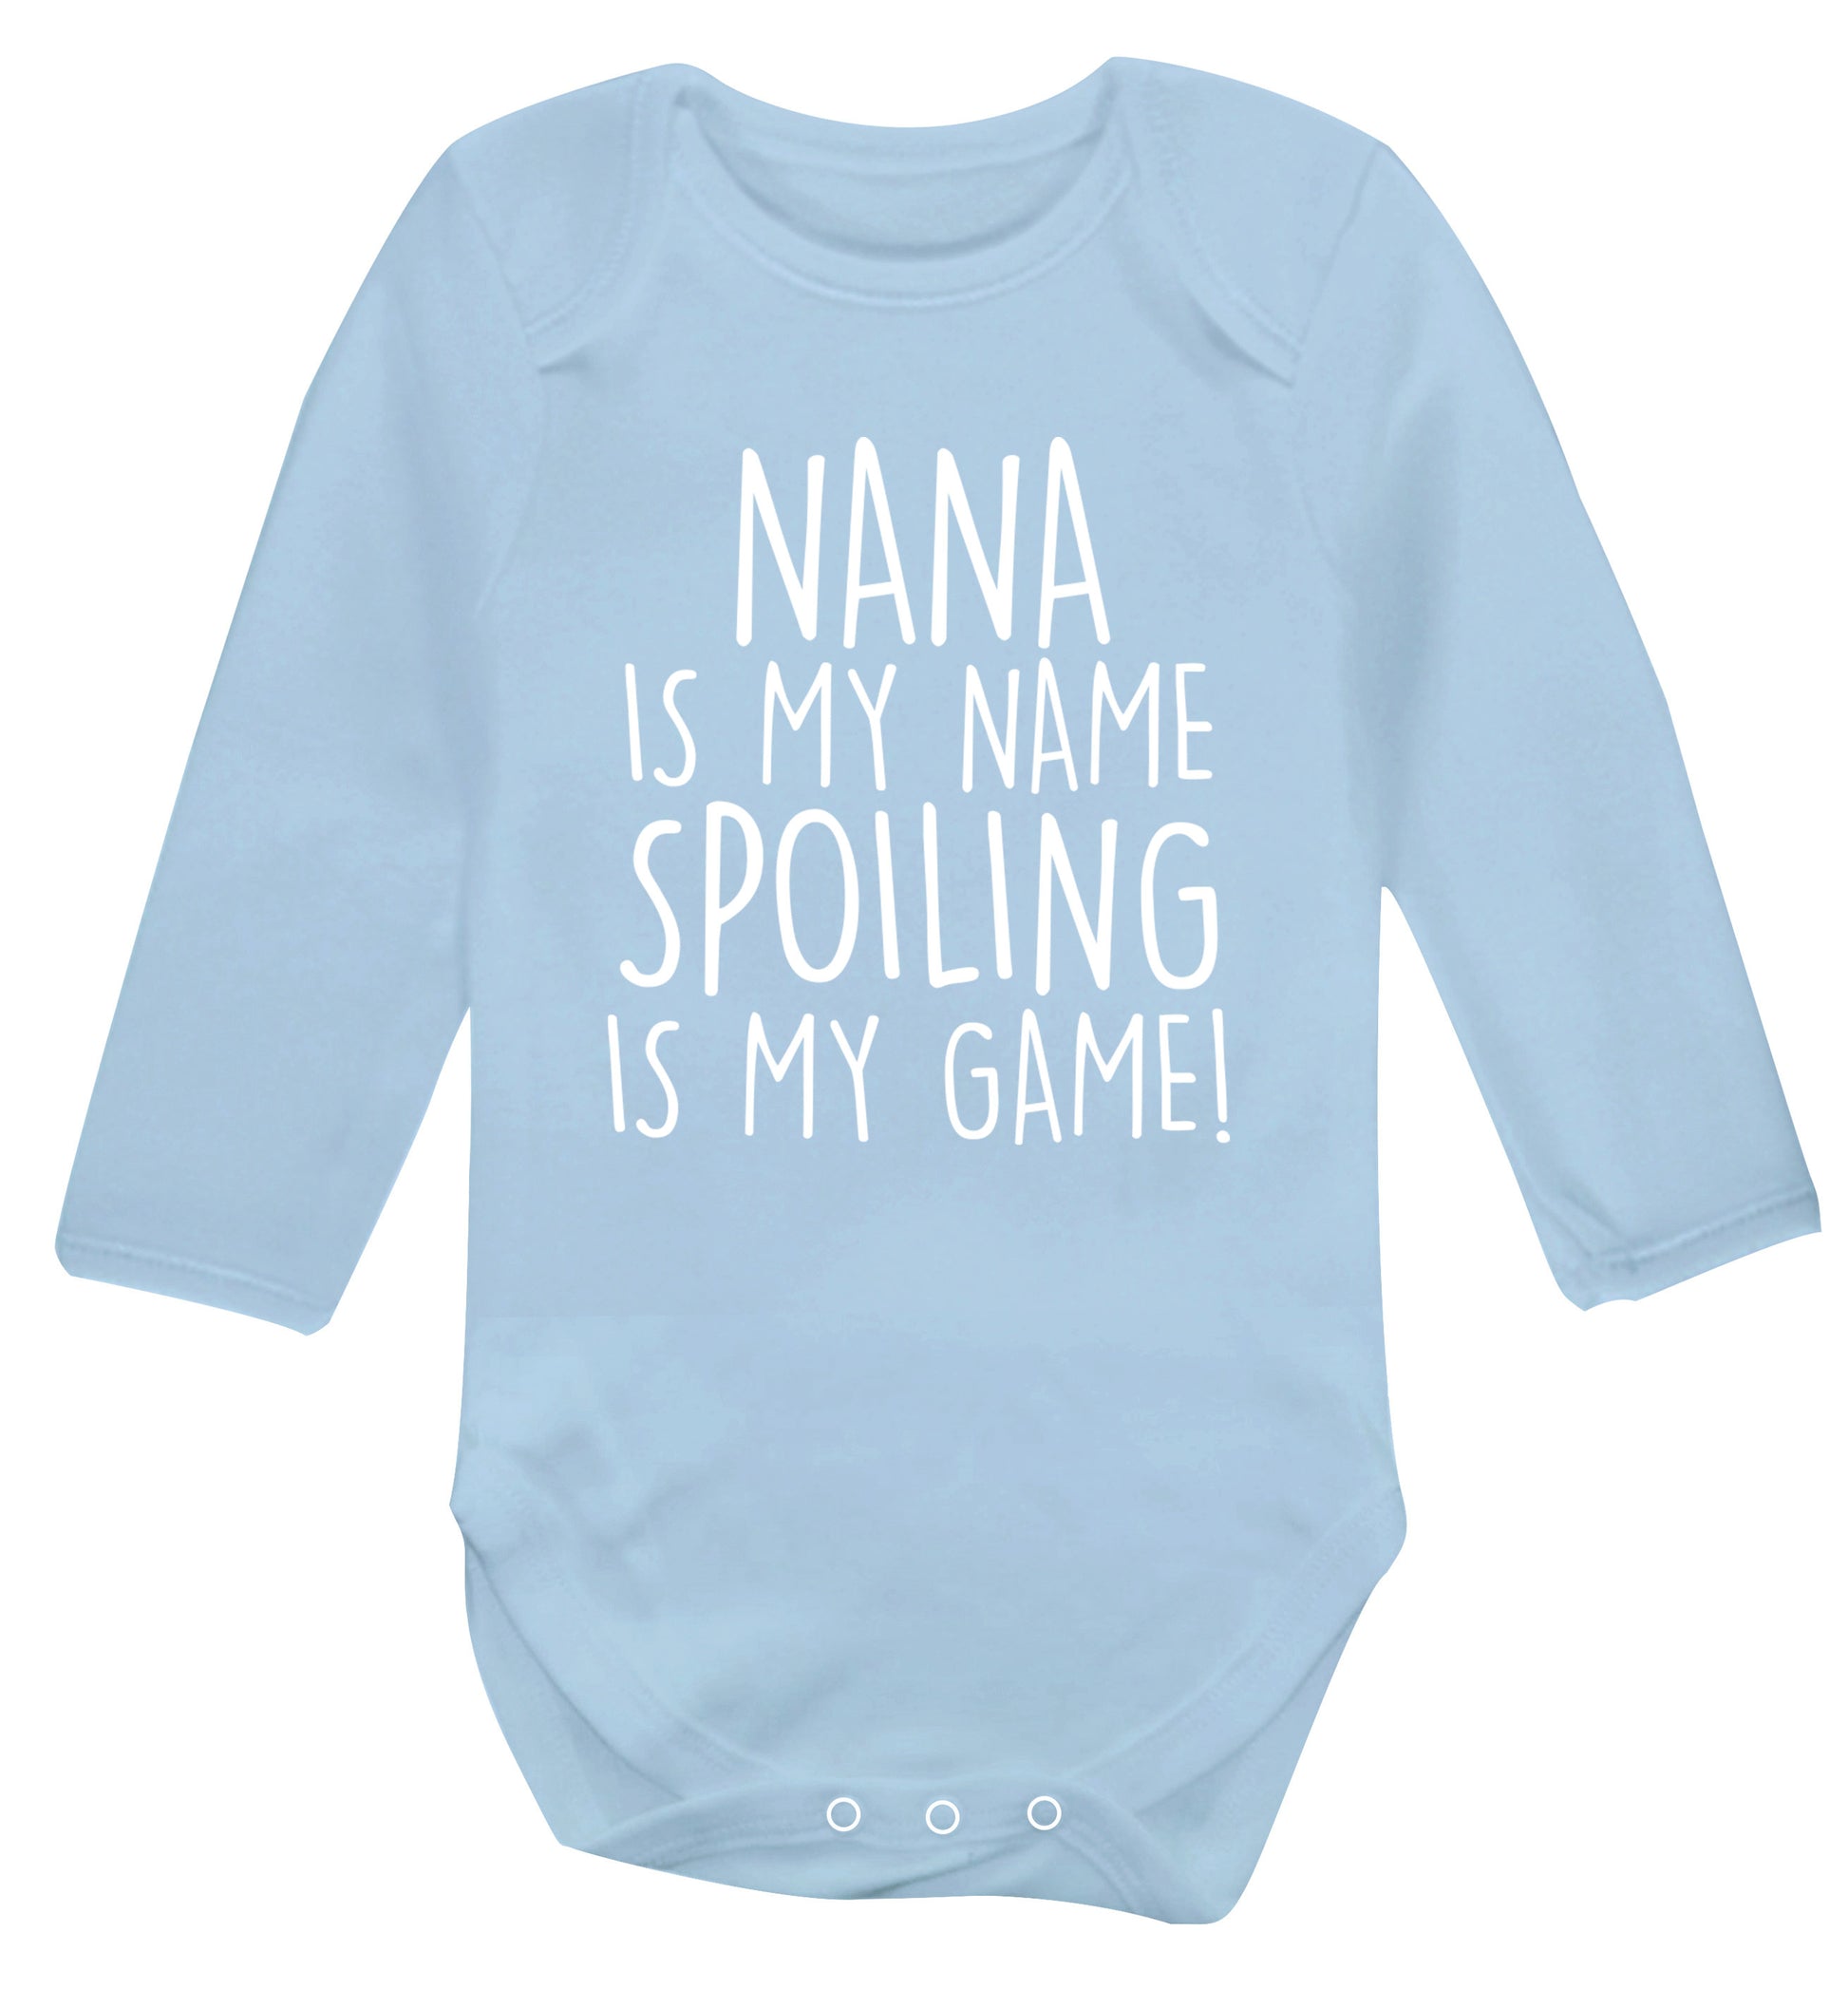 Nana is my name, spoiling is my game Baby Vest long sleeved pale blue 6-12 months